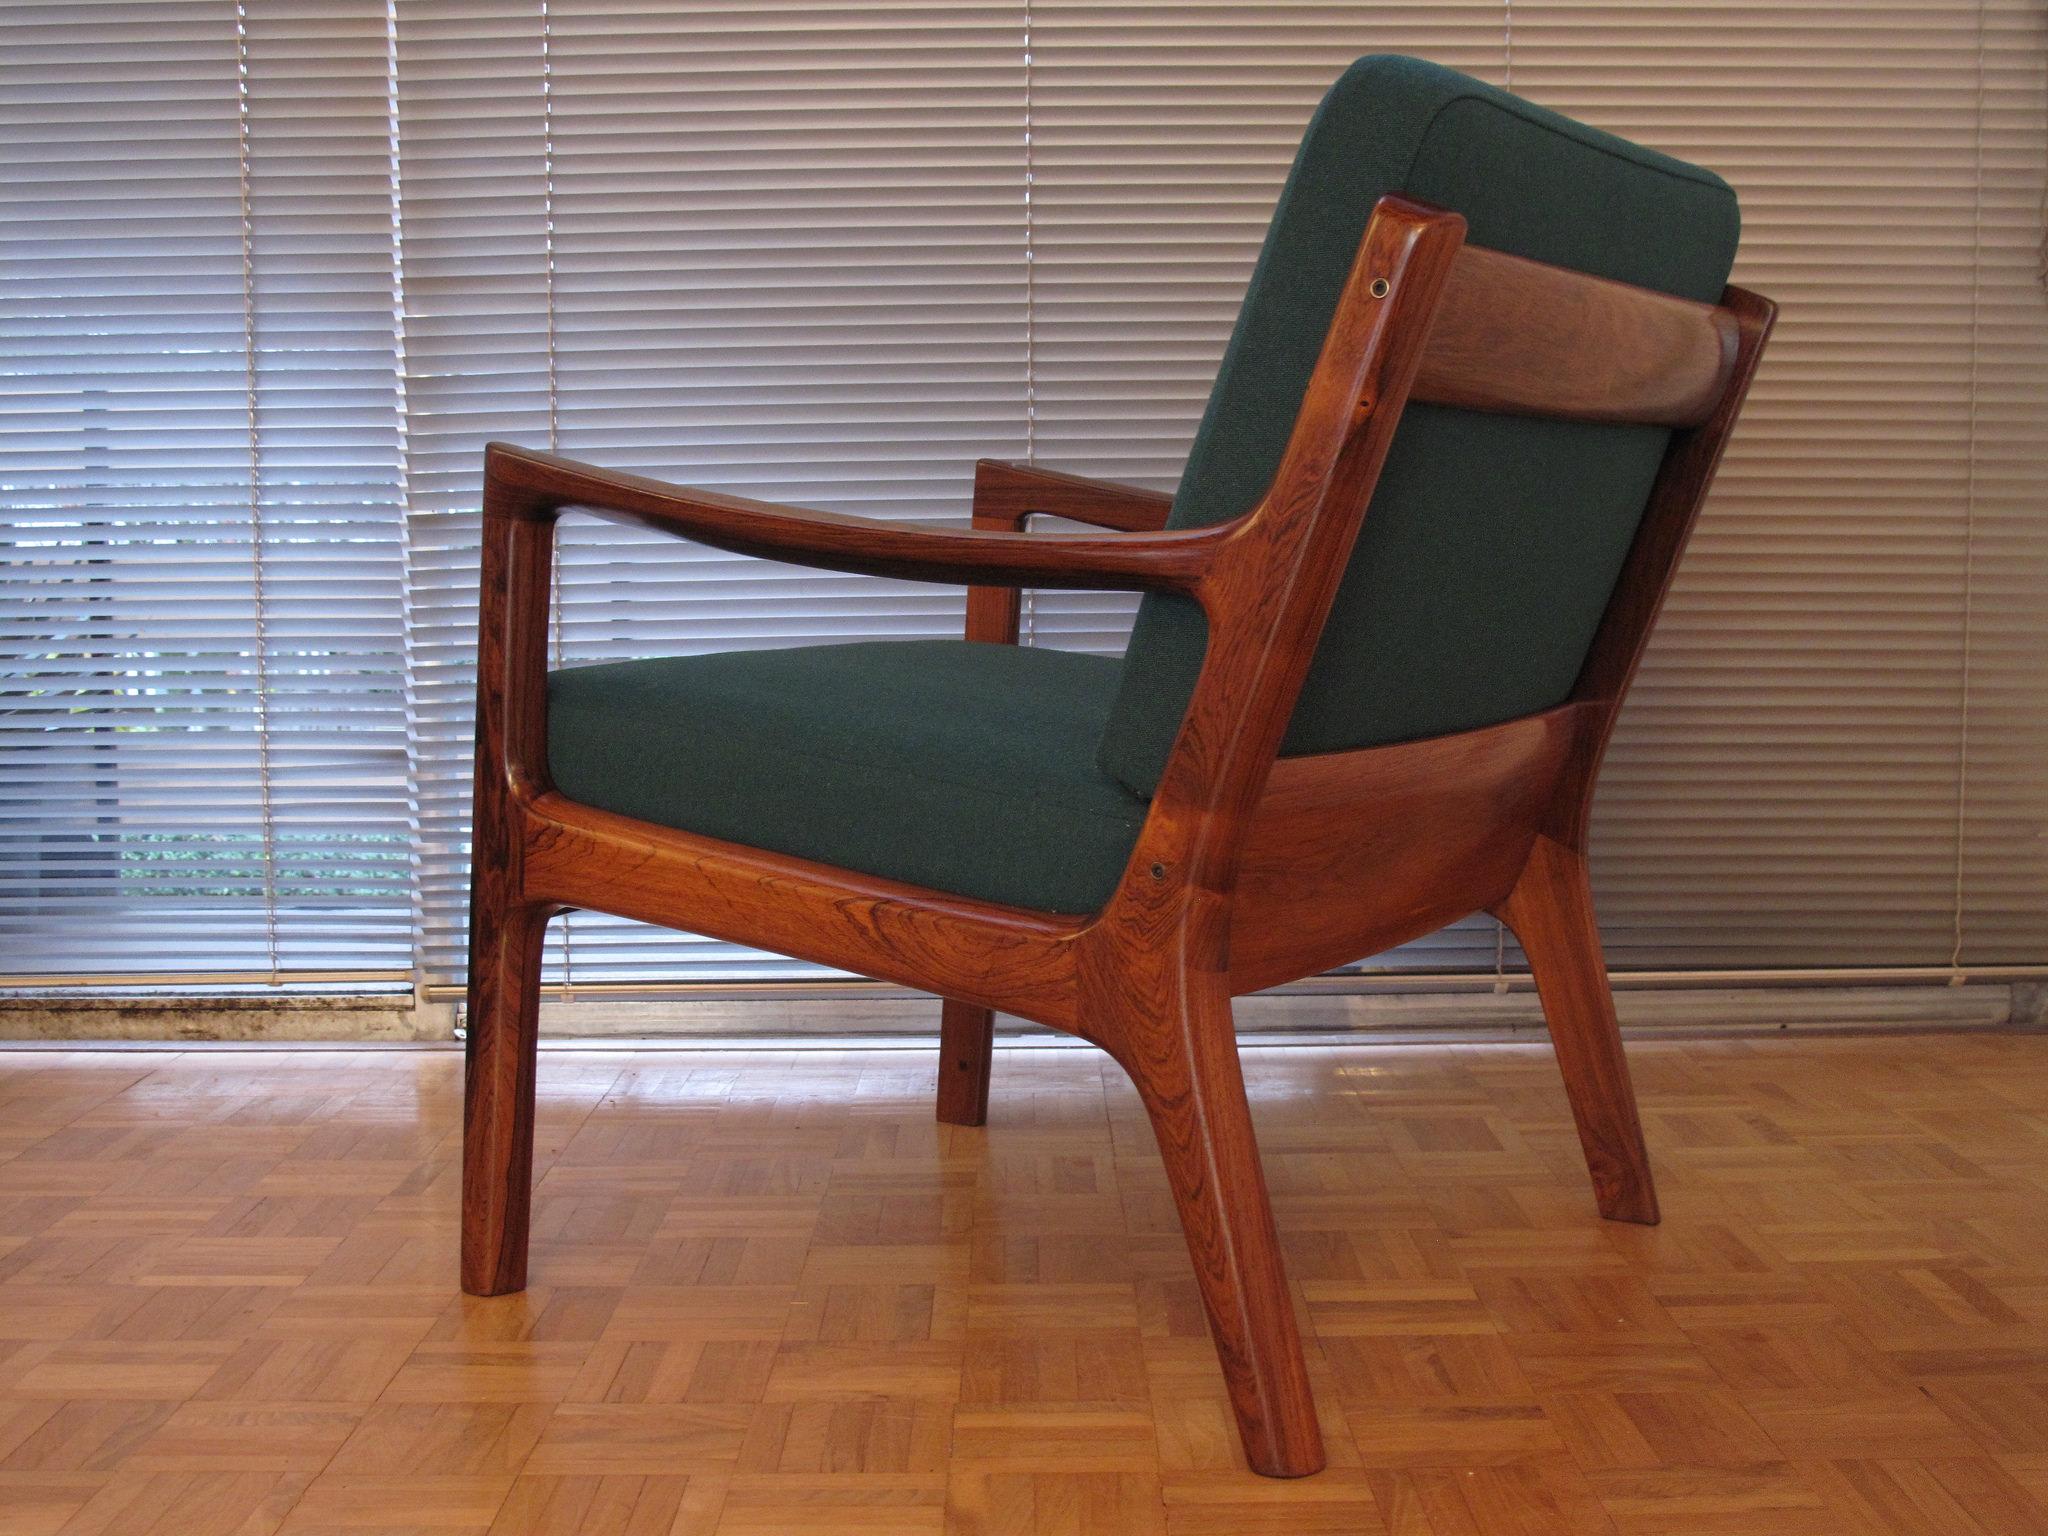 An extremely nice example of a hard to find design. France & Son produced only a small quantity of chairs finished in Brazilian rosewood at the later half of the 1960s.

This design from Ole Wanscher looks absolutely exquisite finished in this